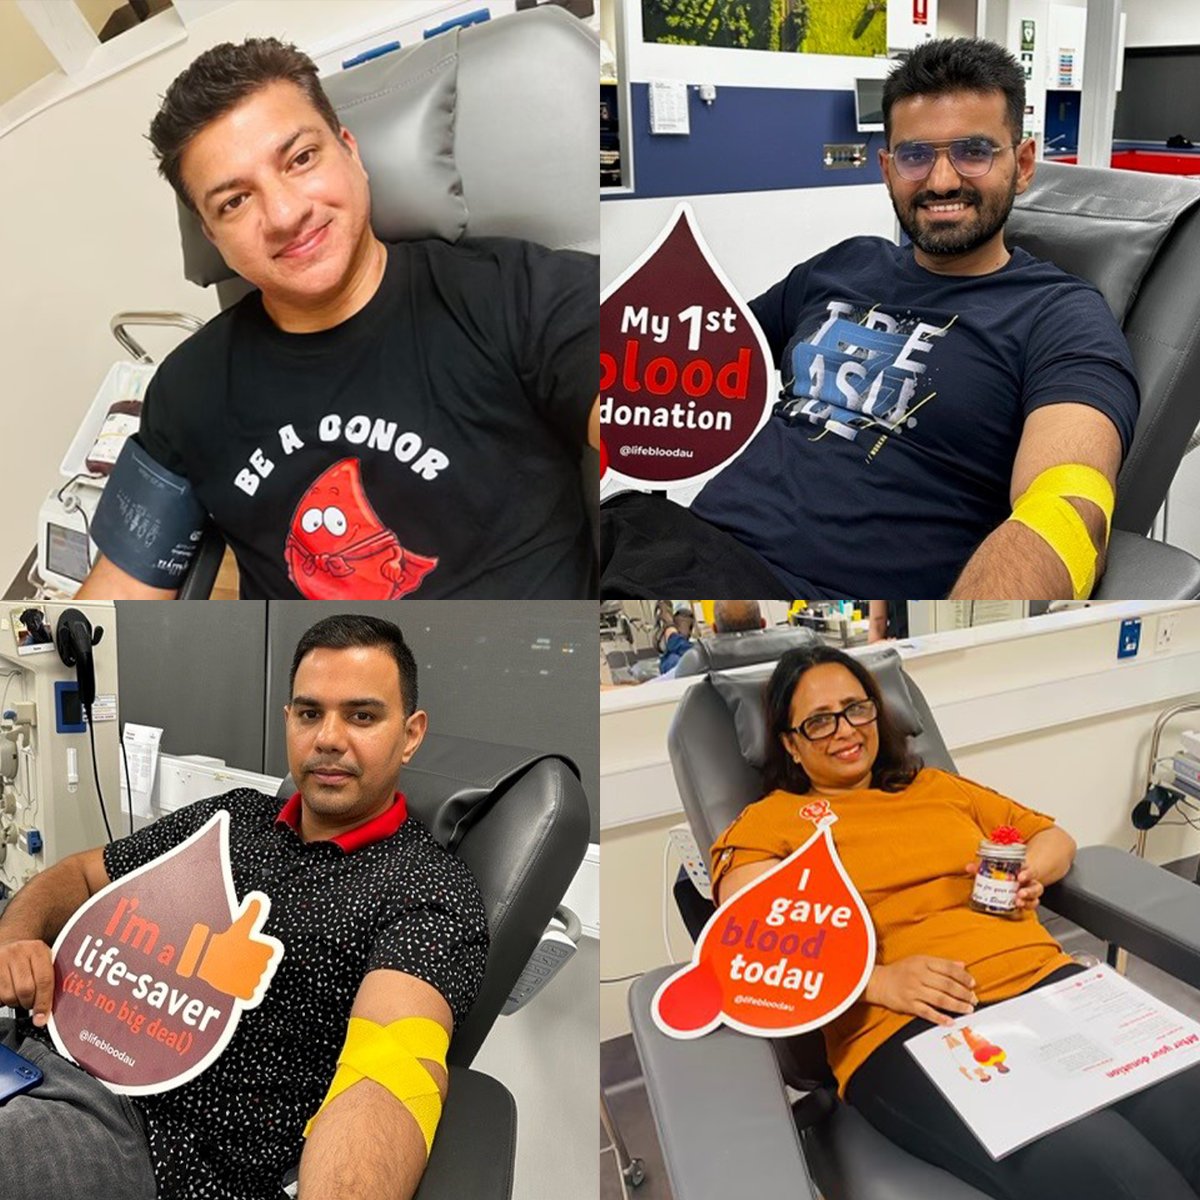 Mithun saw how easy it was to donate blood and created a Team of family and friends, to give back to those less fortunate. Over the past five weeks, they've made over 110 donations, of which 89 are new donors! Find out more about creating a Team at donateblood.page.link/4K9d